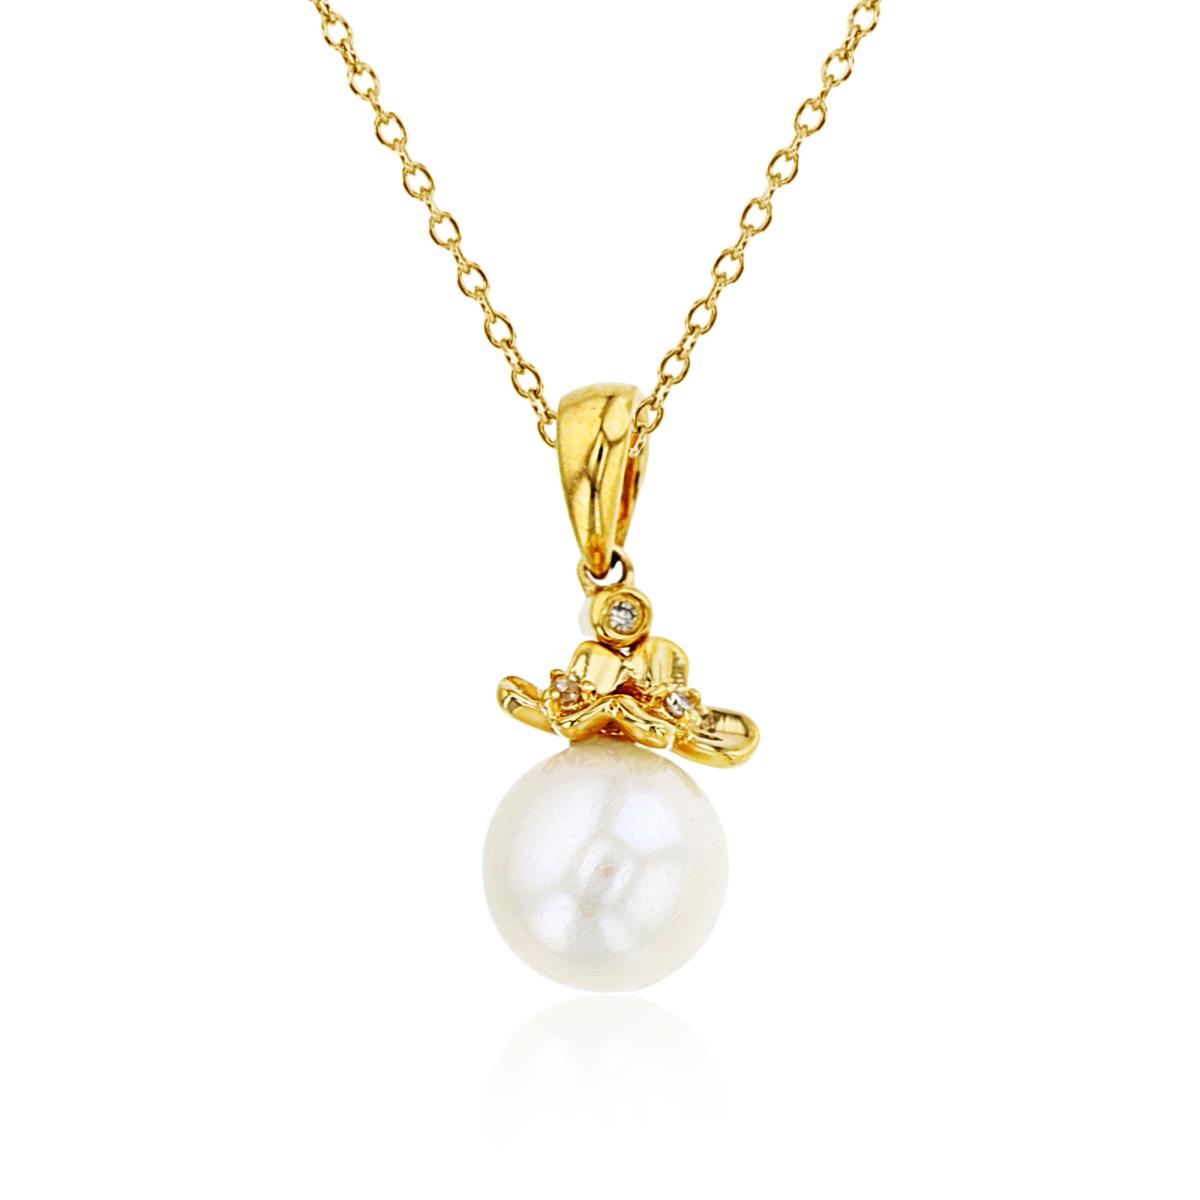 10K Yellow Gold 0.02 CTTW Rnd Diamonds & 7mm White Pearl 18"Necklace